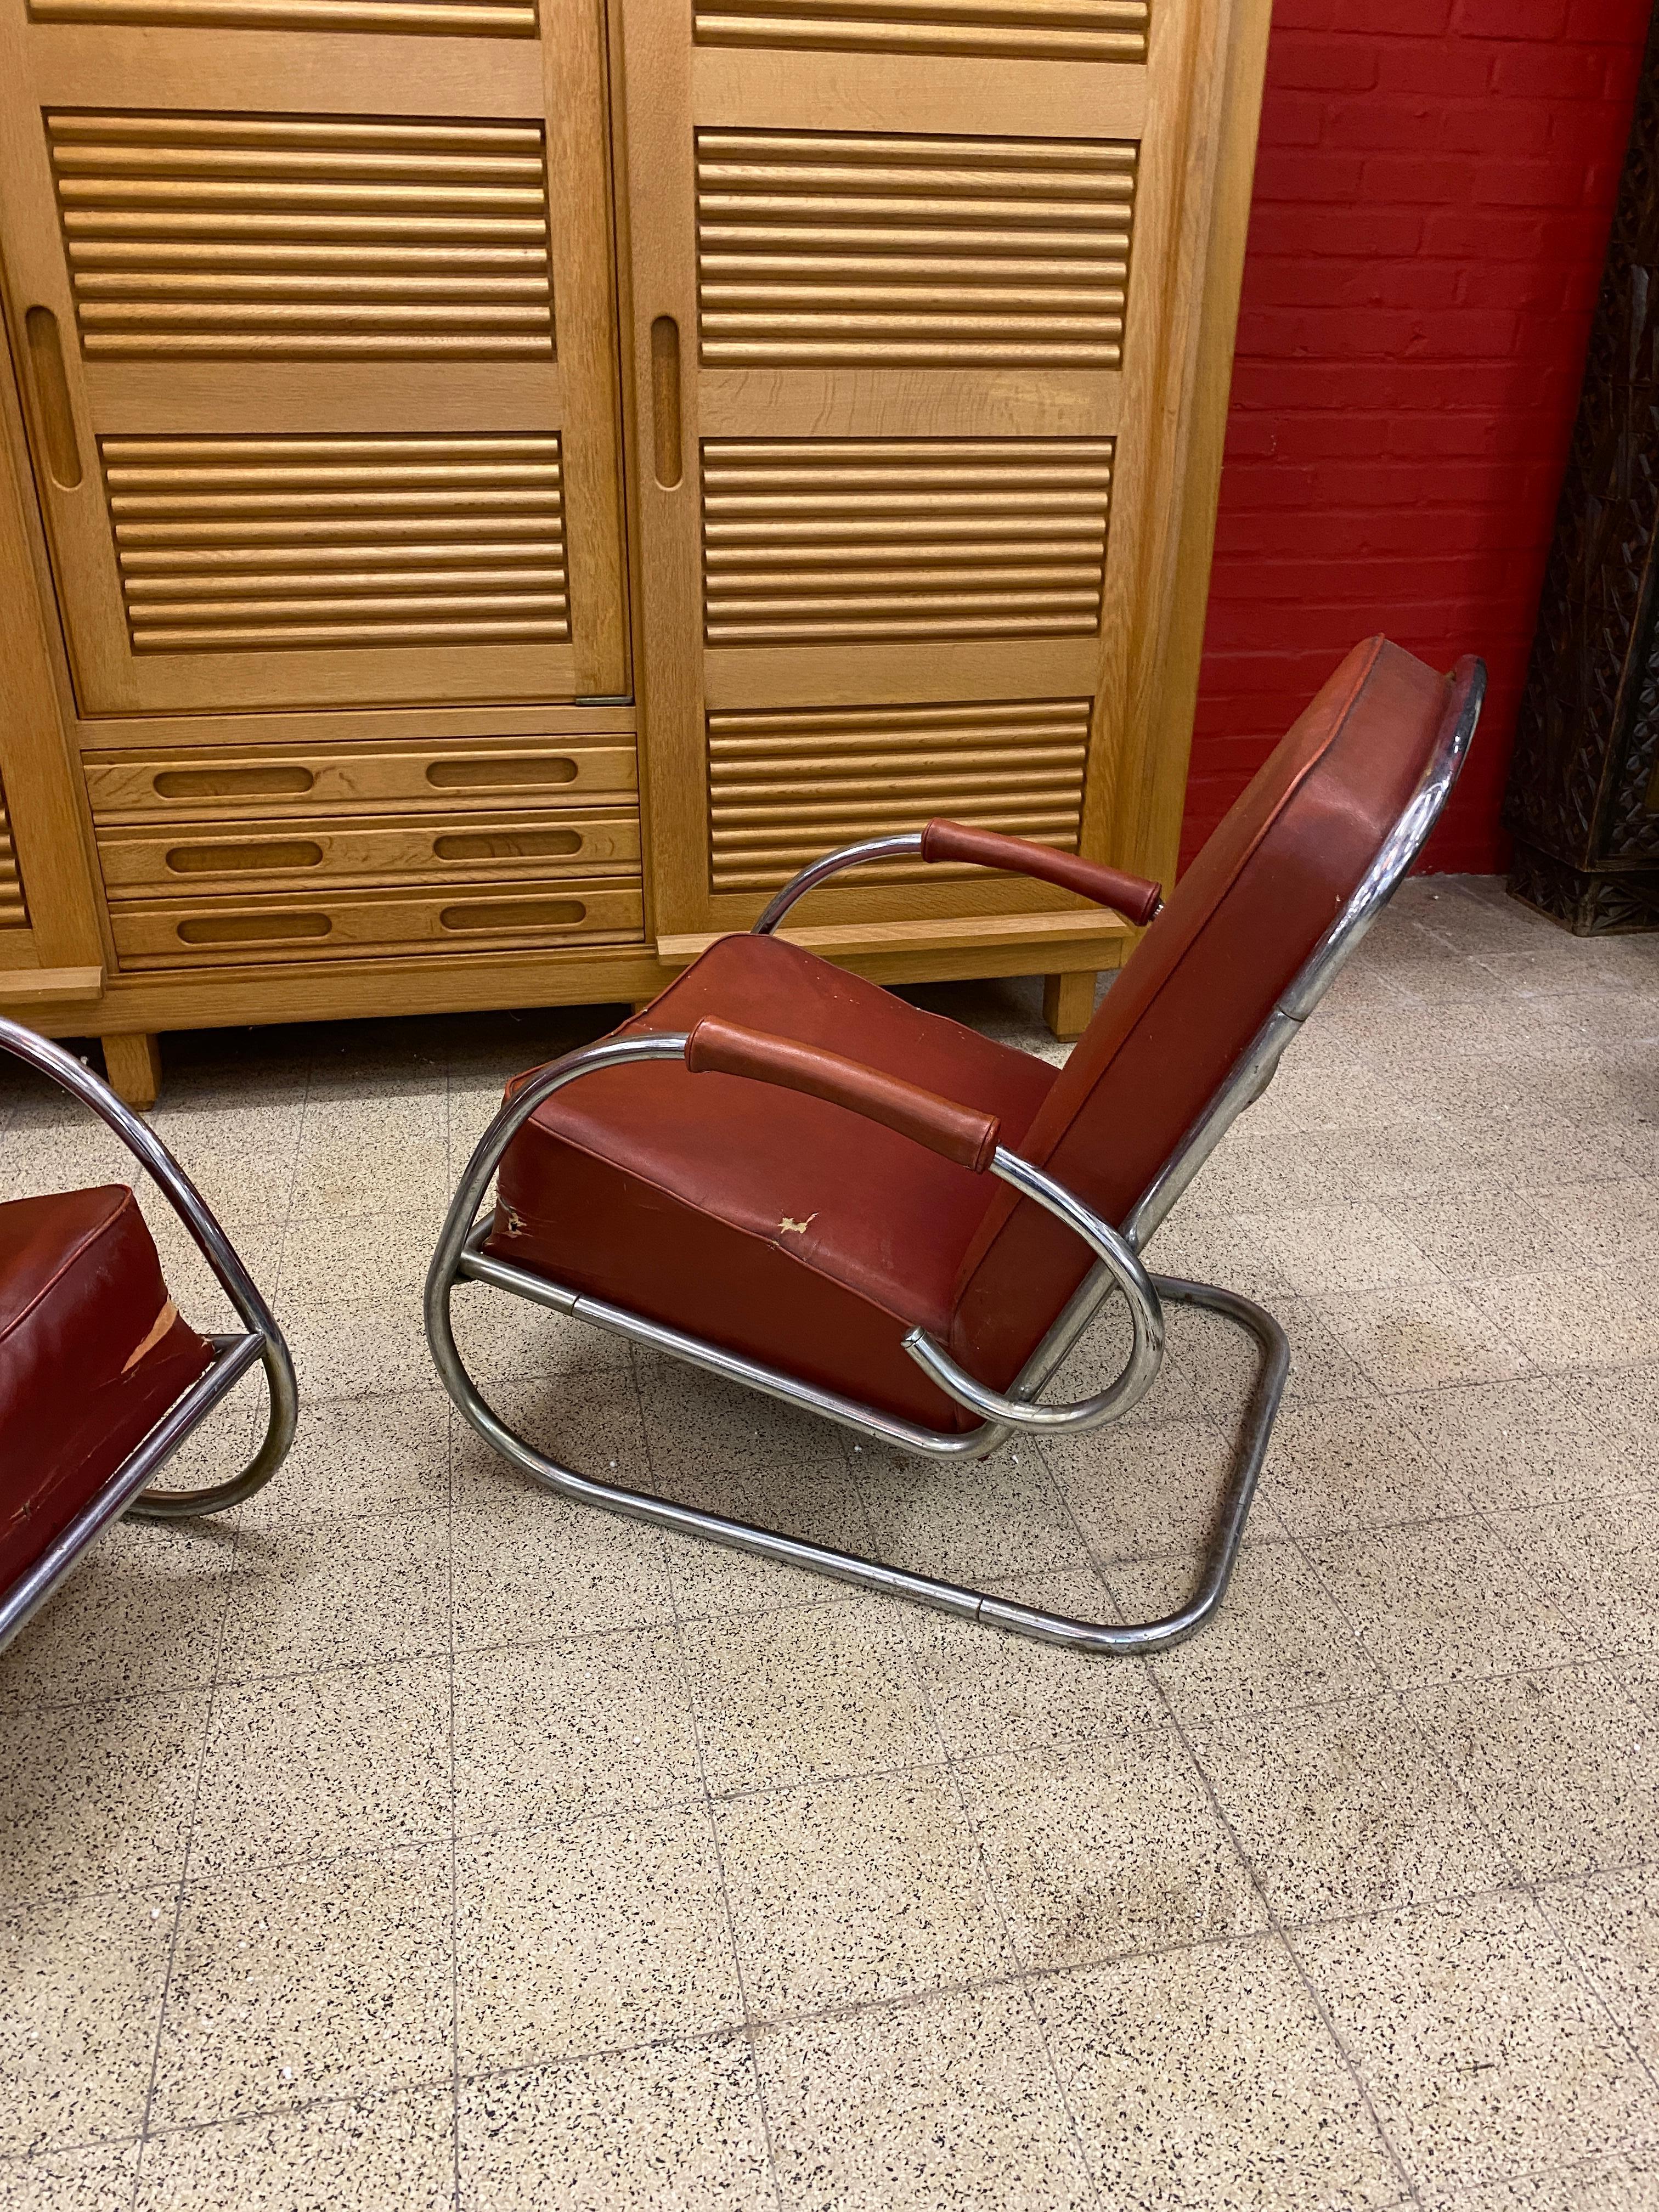 2 Modernist Art Deco Armchairs in Chromed Metal and Faux Leather circa 1920-1930 For Sale 4